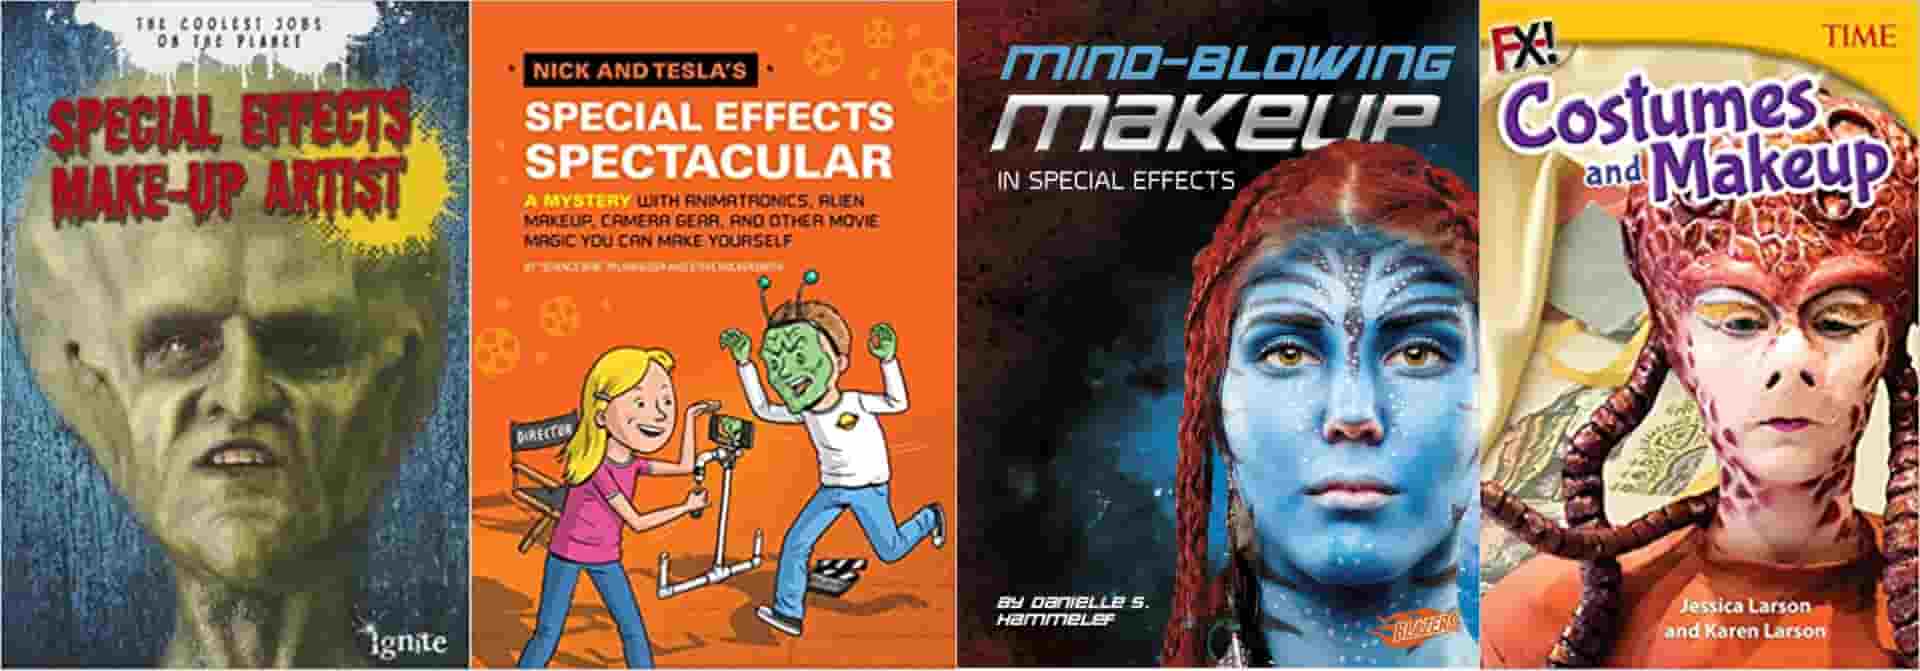 special effects books for kids sfxzone